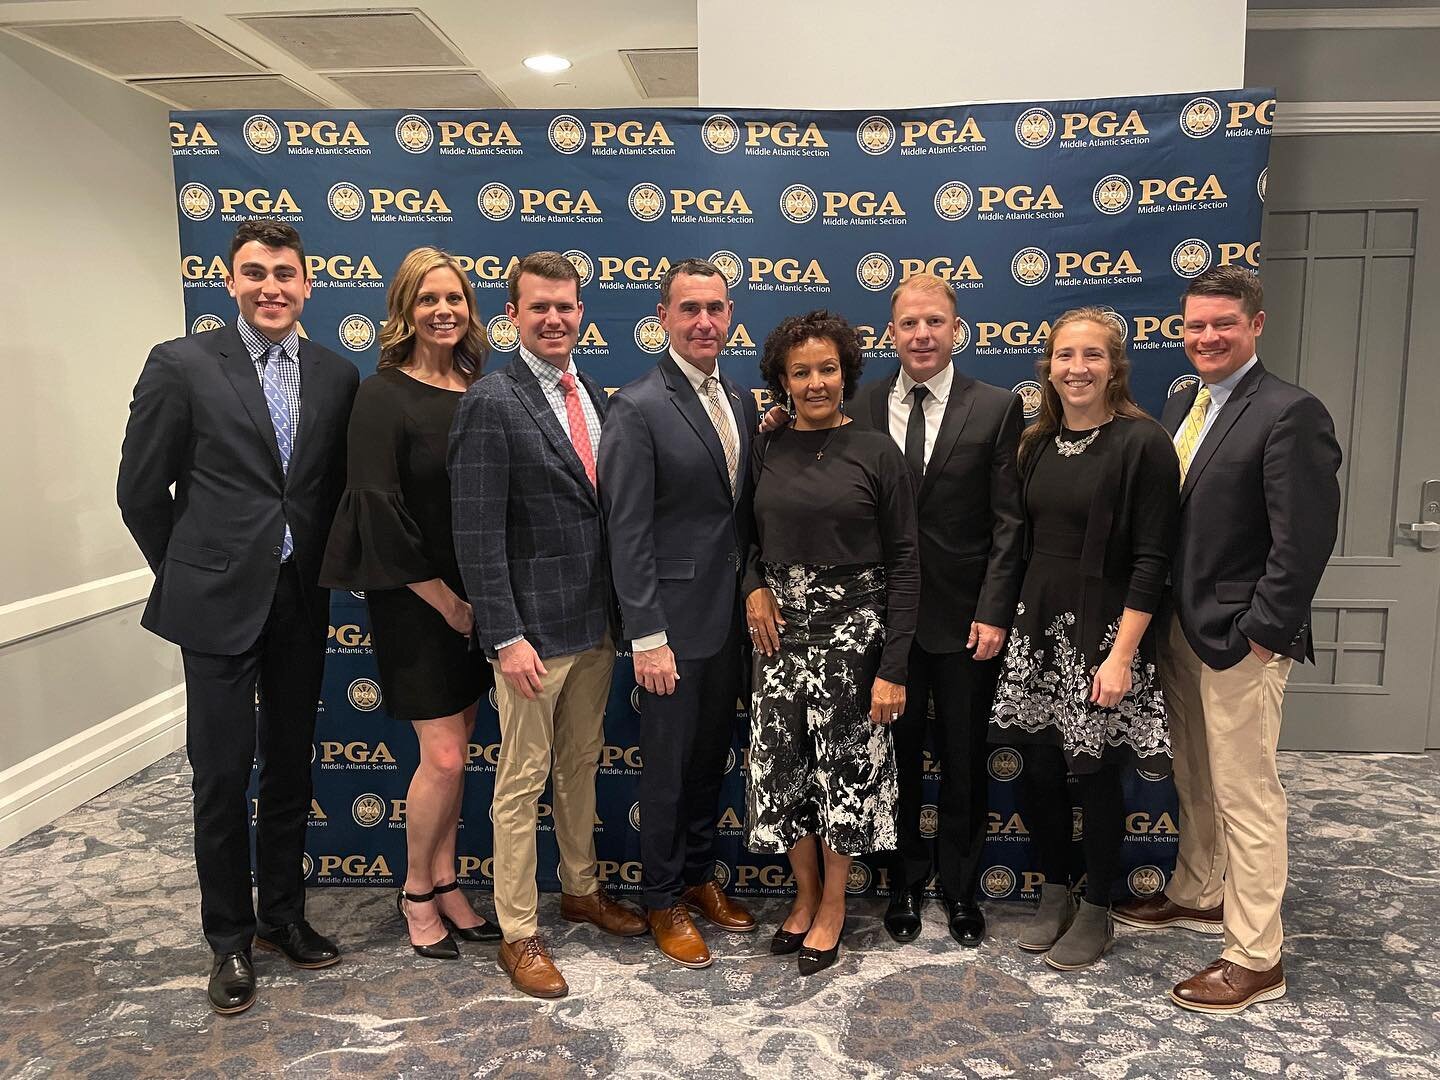 The @mapga_ had our super meeting this week and it was awesome to celebrate Jason Epstein who was awarded the 2021 Straughsbaugh award and a great friend Pat Bedingfield who was awarded the 2021 Teacher of the Year.  A special thanks to all the prese